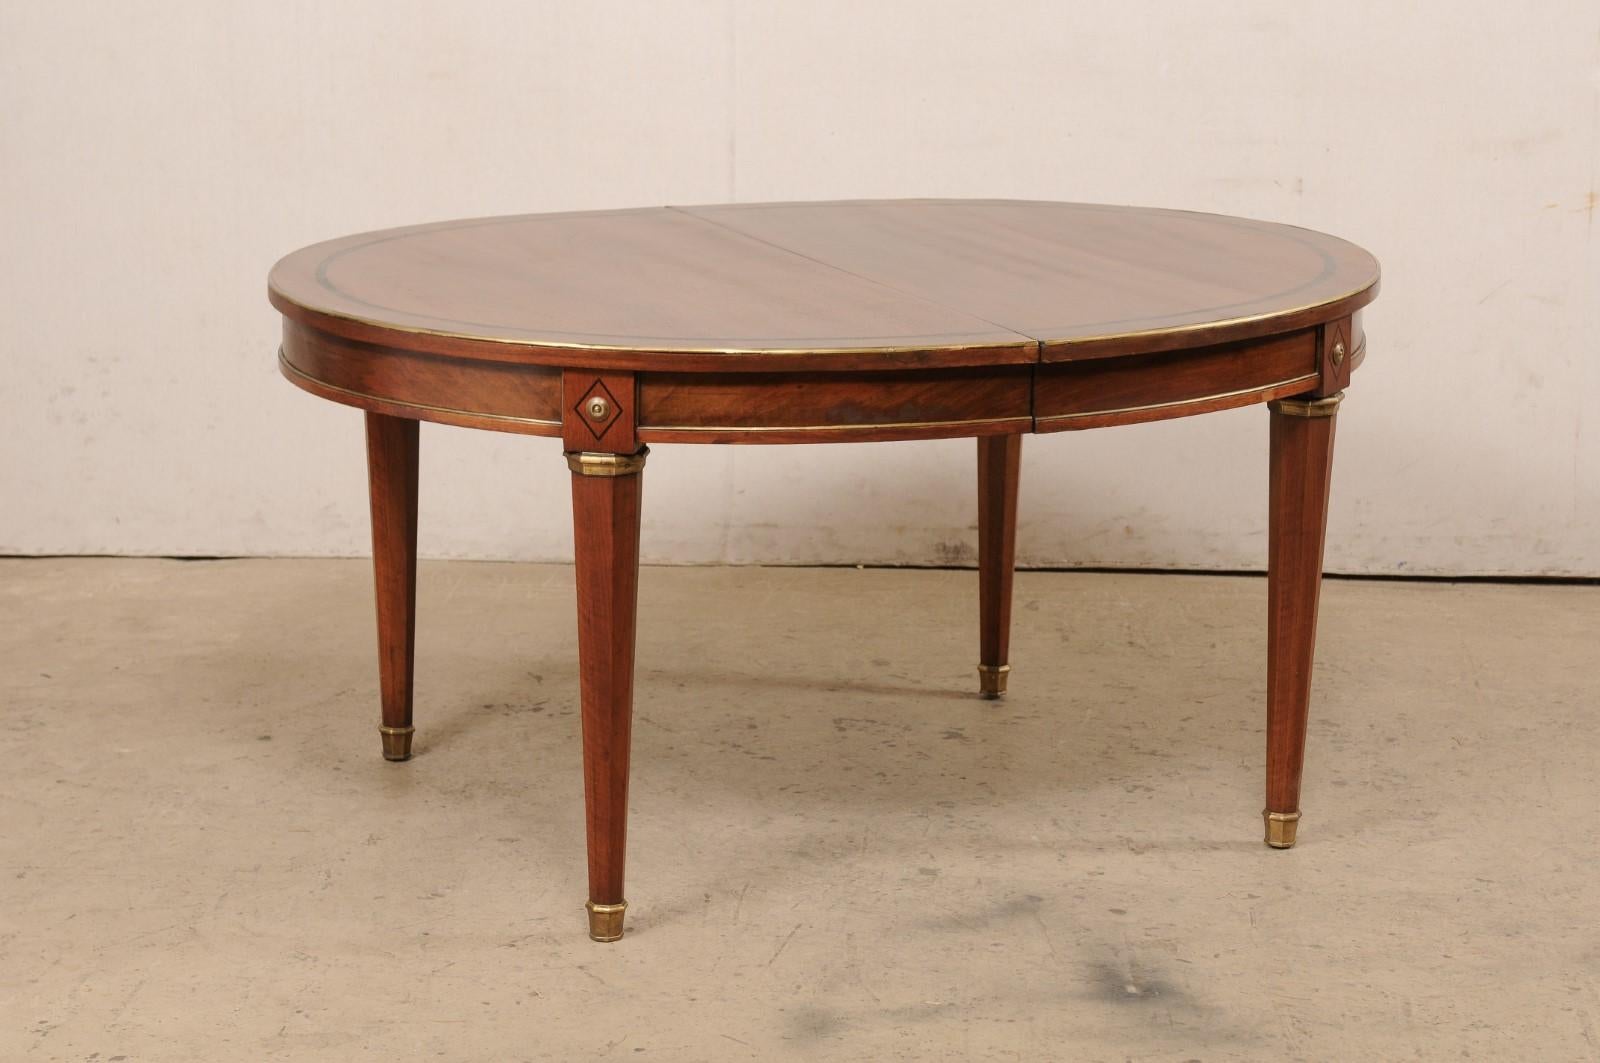 French Neoclassic Style Oval Table with Brass Trim & Accents '1 Leaf Extension' For Sale 2